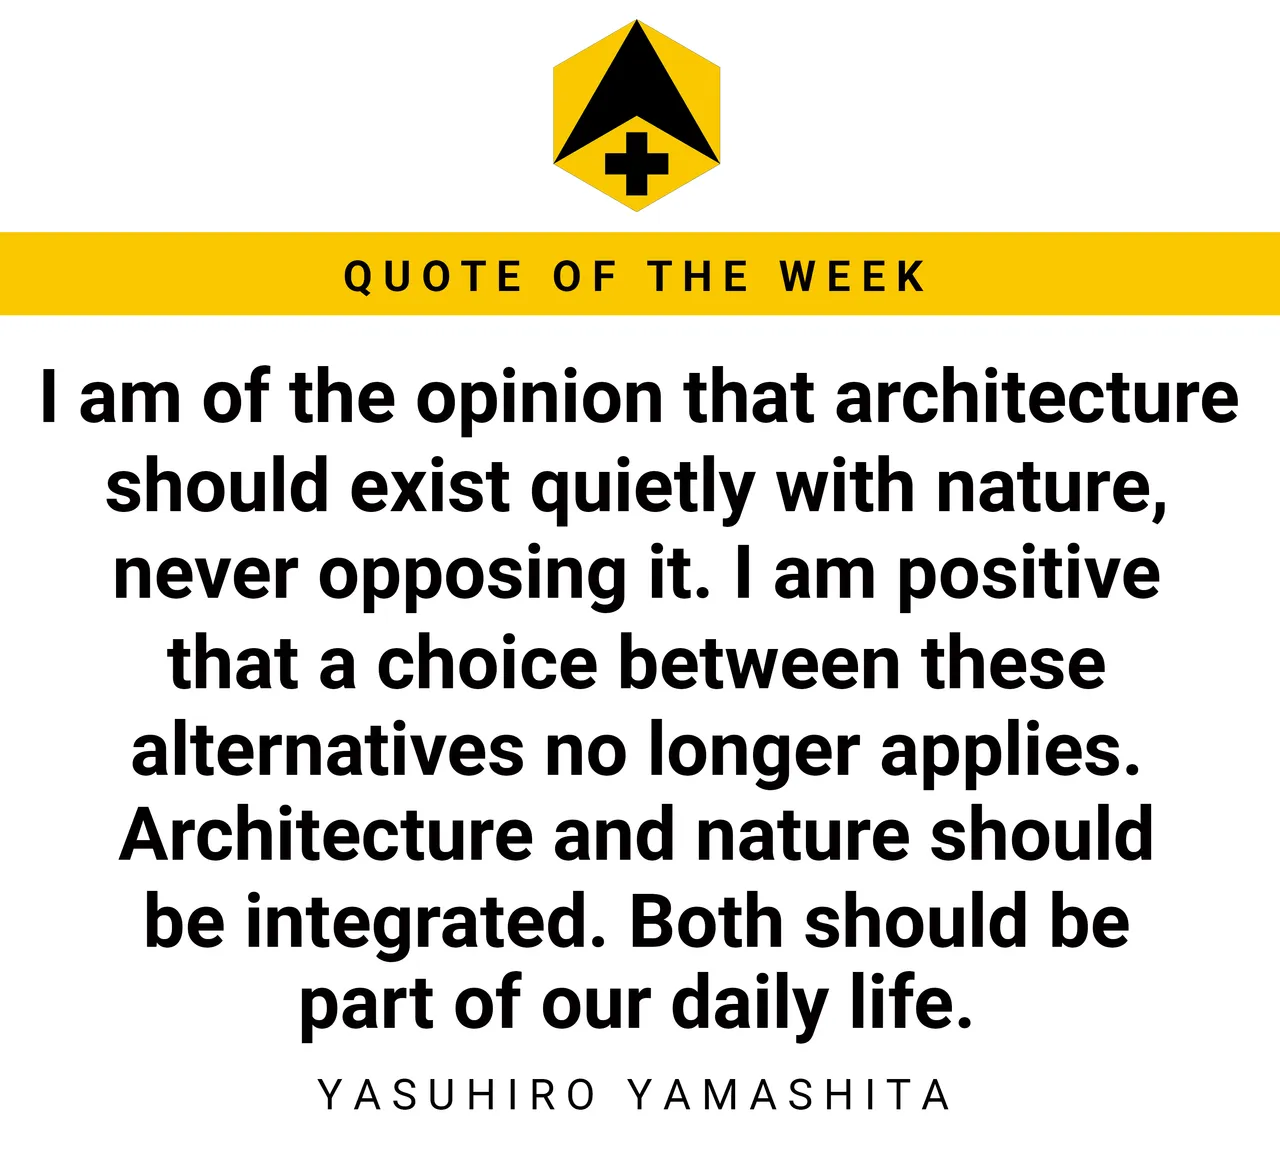 2022-06-28 AB 73 QUOTE OF THE WEEK.png